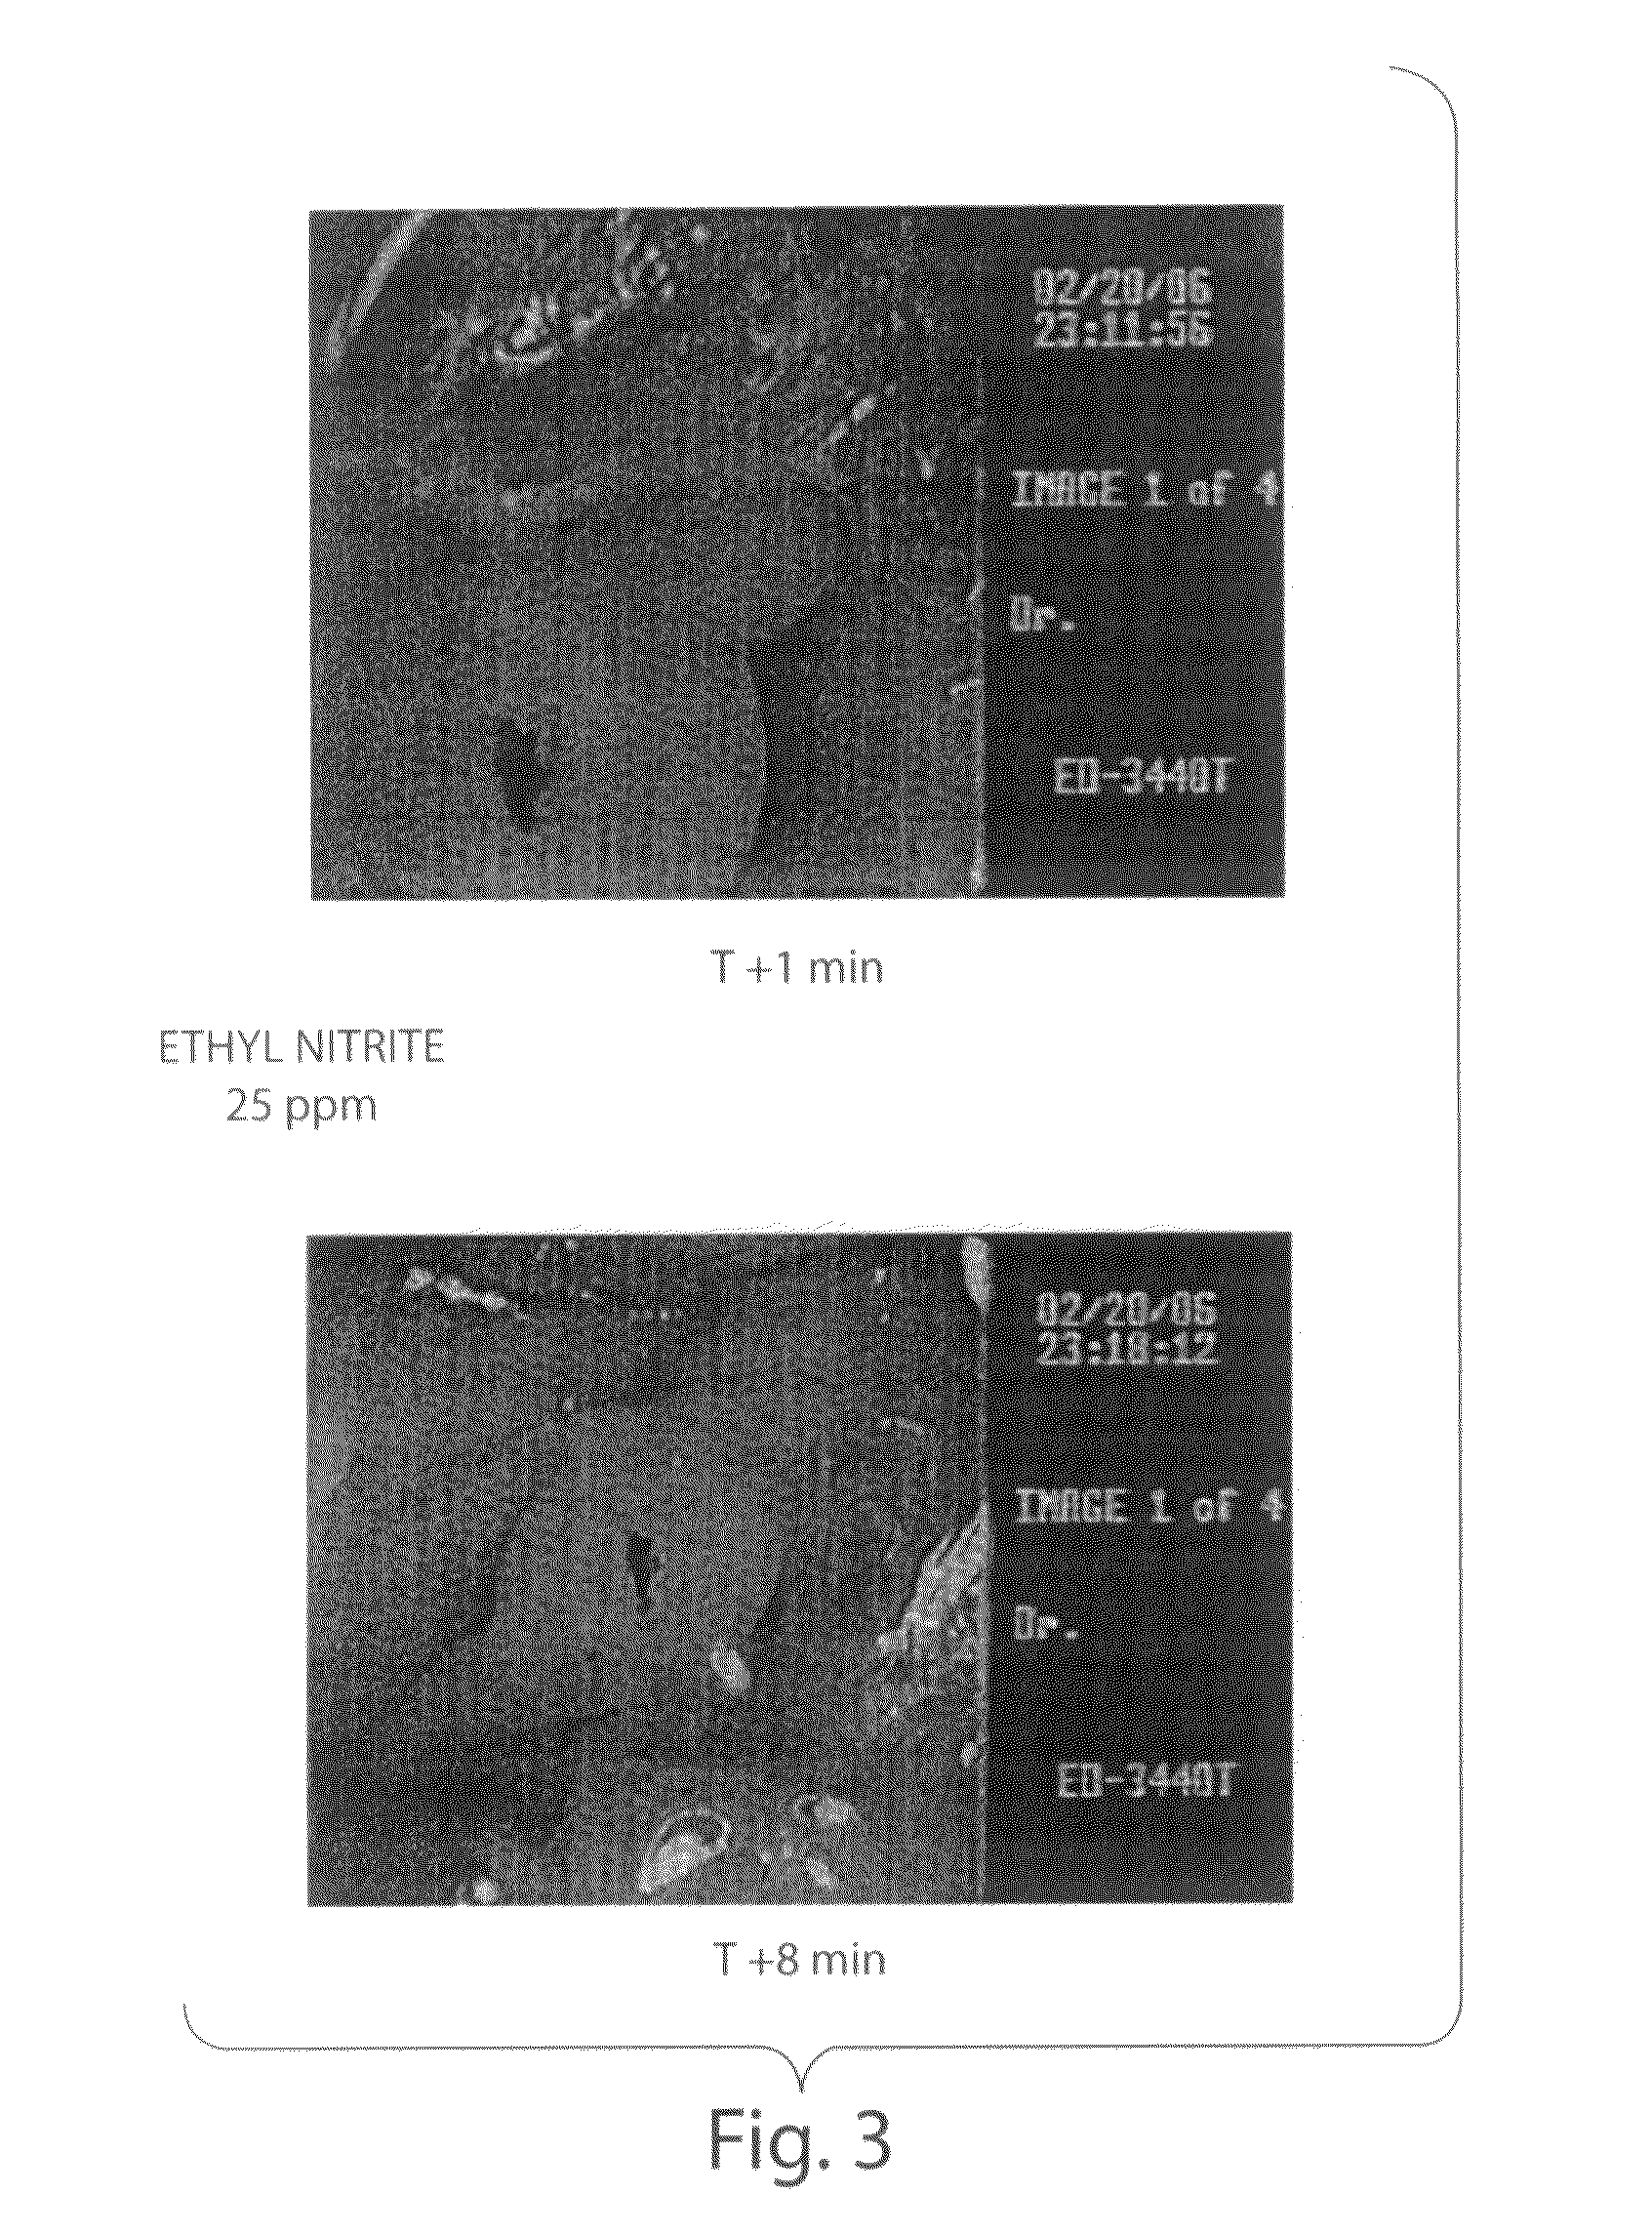 Ethyl nitrite as a gastrointestinal smooth muscle relaxant and diagnostic and therapeutic uses thereof